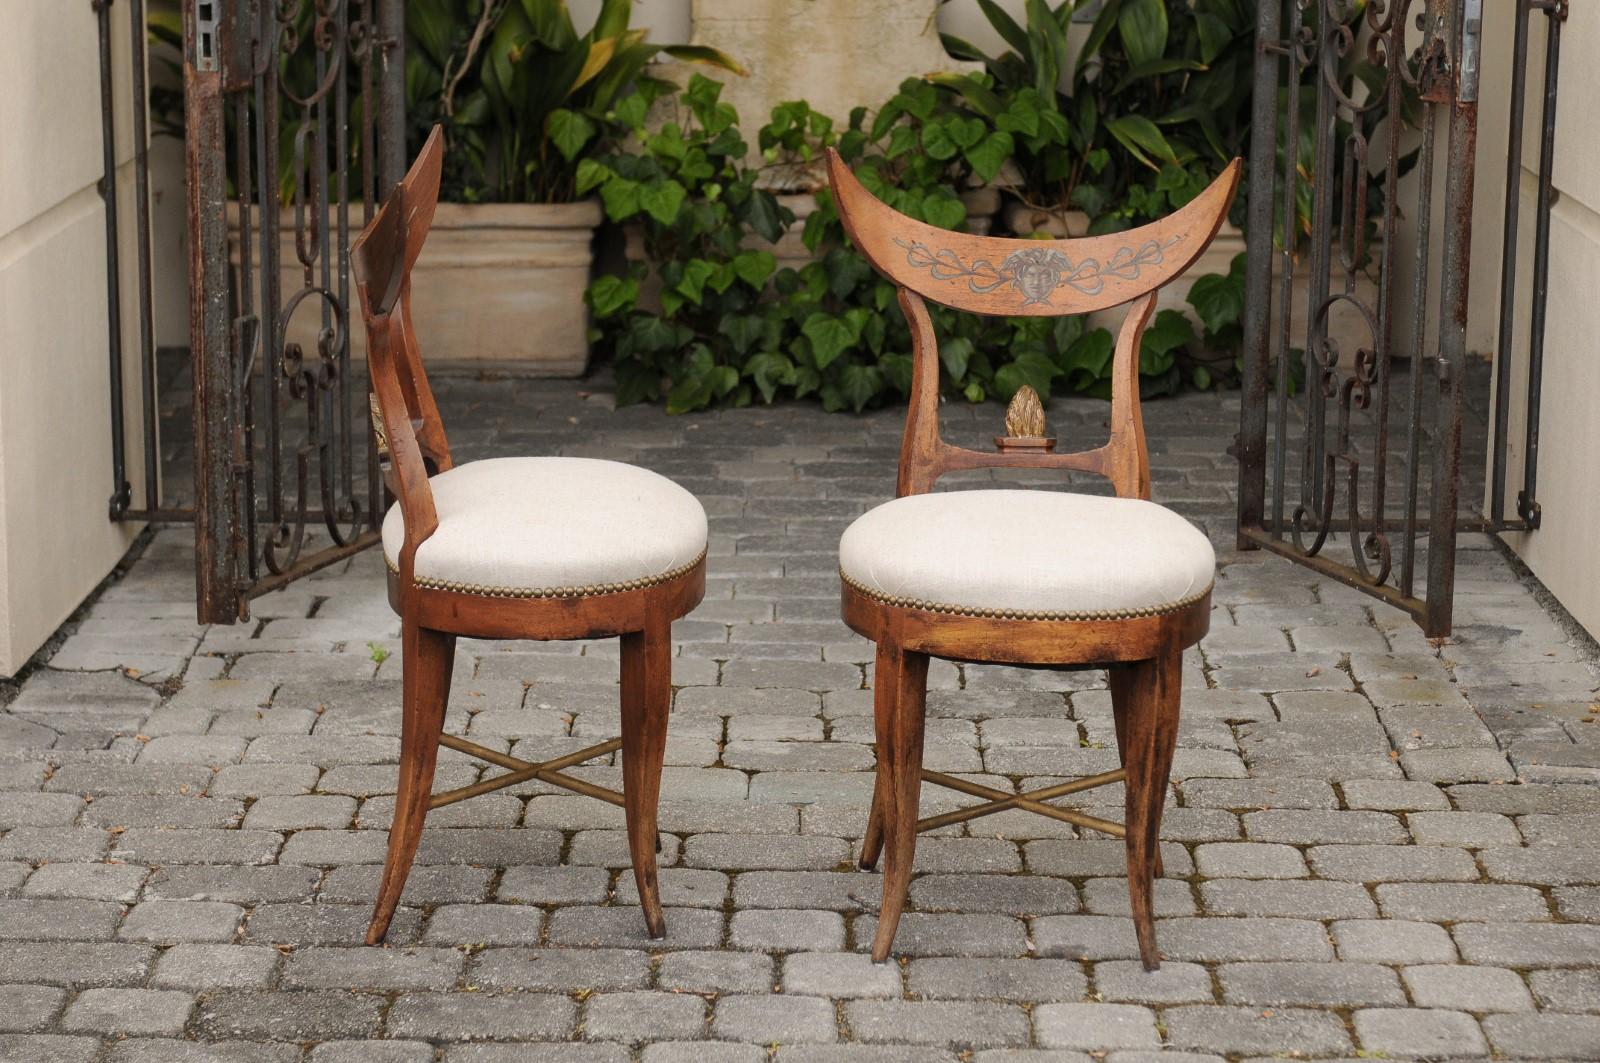 Pair of Italian 1860s Upholstered Side Chairs with Crescent Backs and Saber Legs For Sale 5